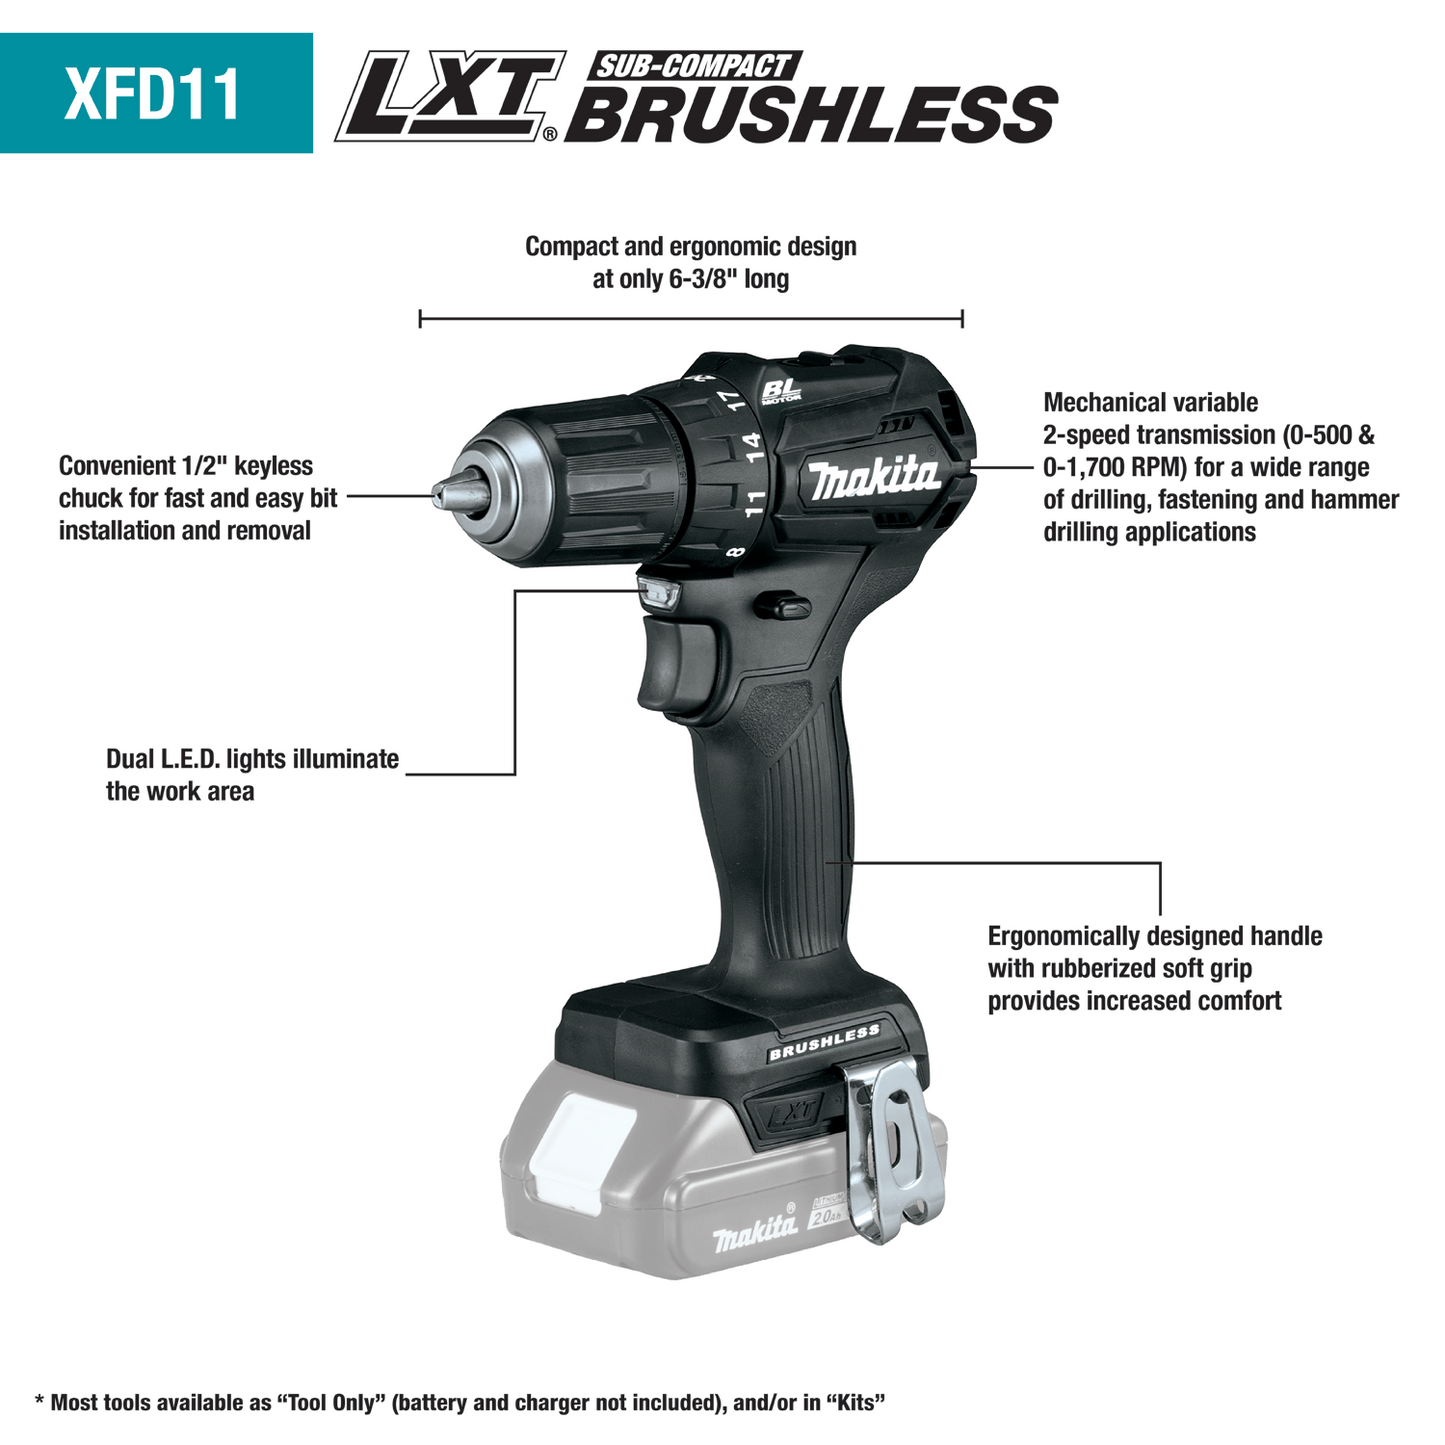 Makita 18 Volt LXT Lithium Ion Sub Compact Brushless Cordless 1/2 Inch Driver Drill Factory Serviced (Tool Only)